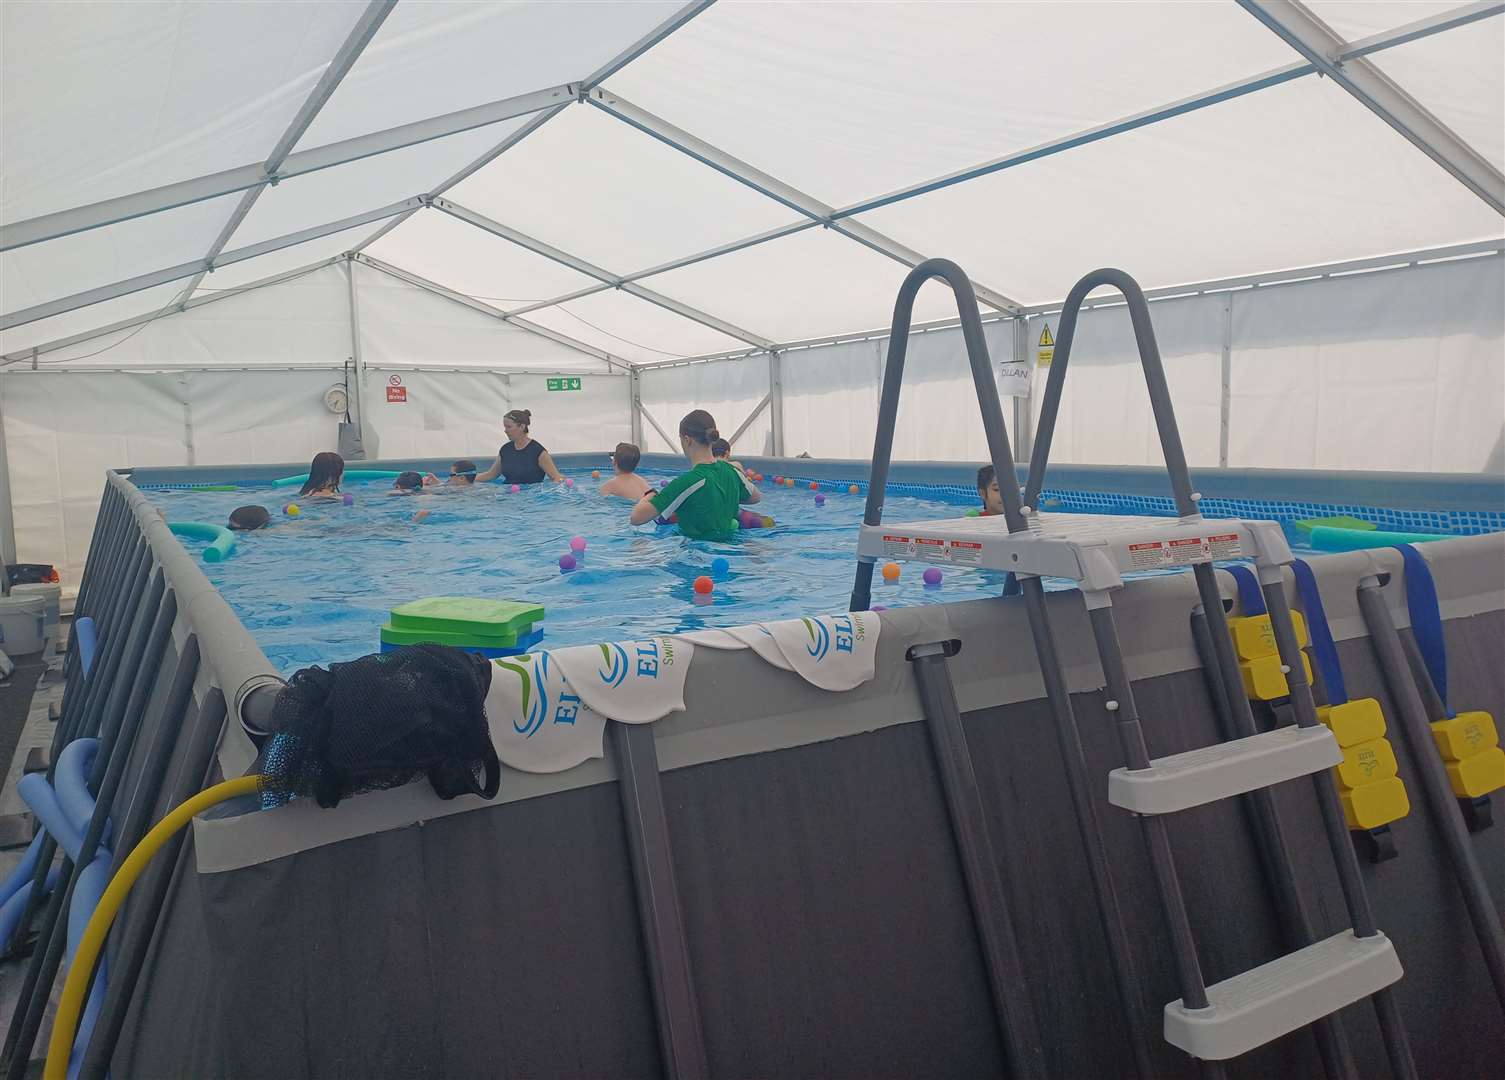 A temporary pool has been built at Five Acre Wood School in Maidstone